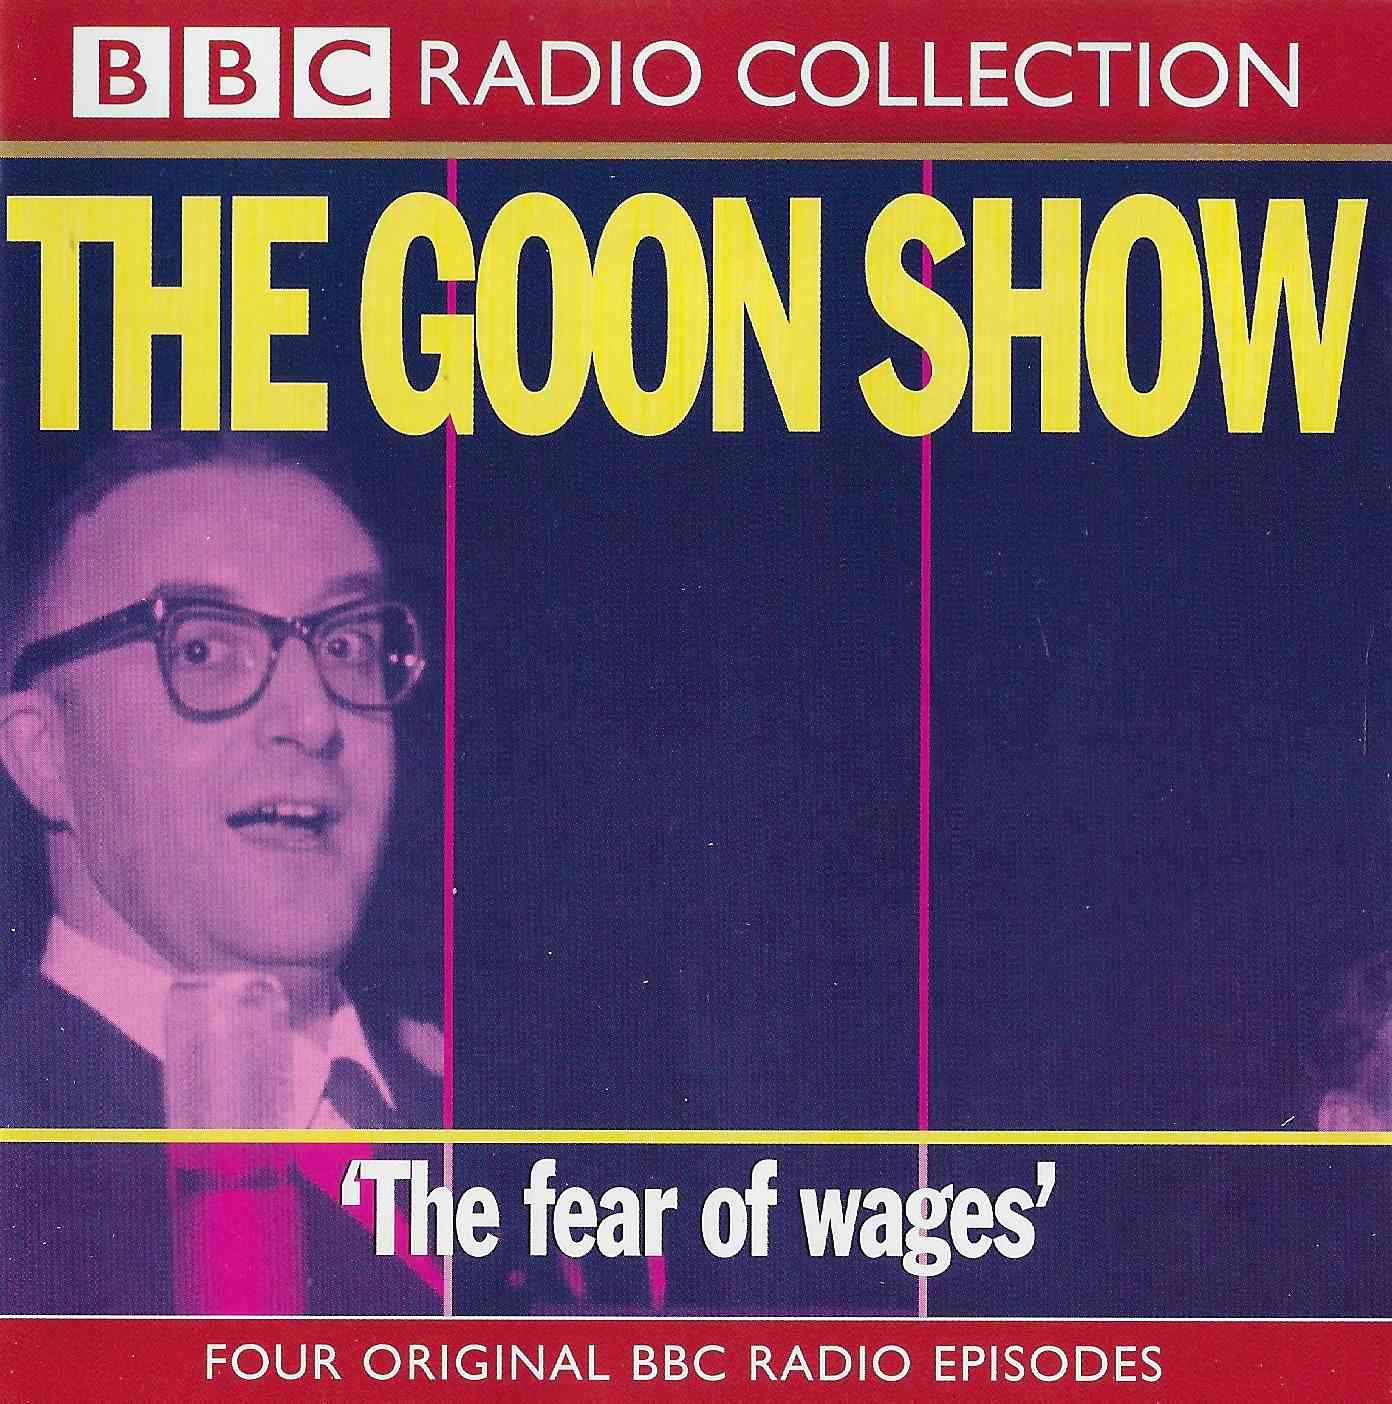 Picture of ISBN 0-563-53629-2 The Goon Show 20 - The fear of wages by artist Spike Milligan / Larry Stephens from the BBC cds - Records and Tapes library